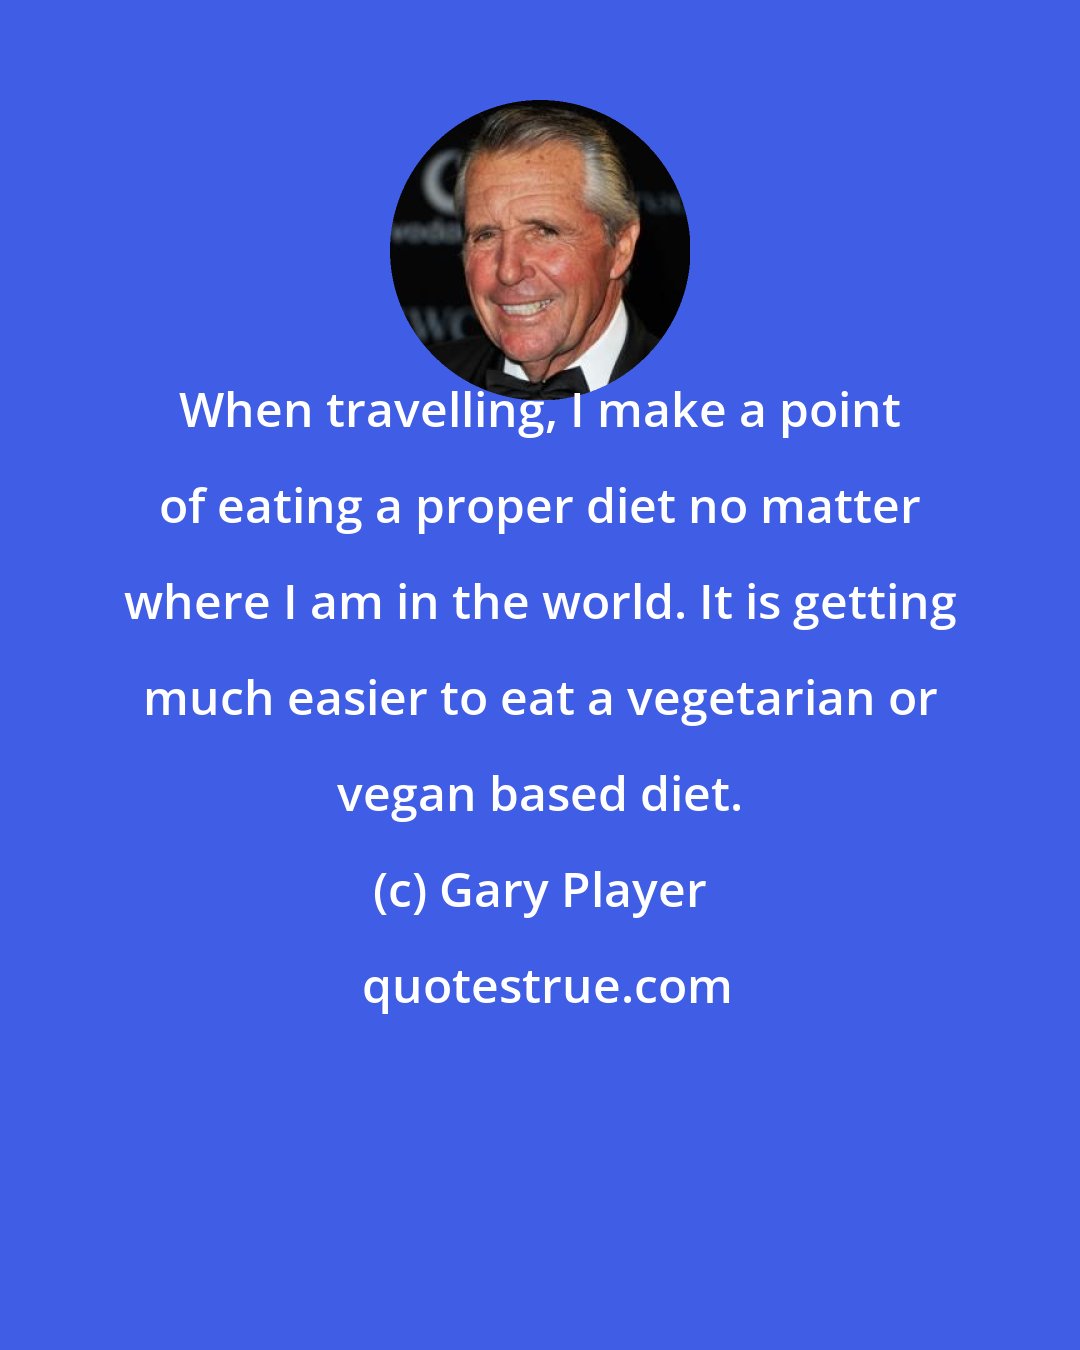 Gary Player: When travelling, I make a point of eating a proper diet no matter where I am in the world. It is getting much easier to eat a vegetarian or vegan based diet.